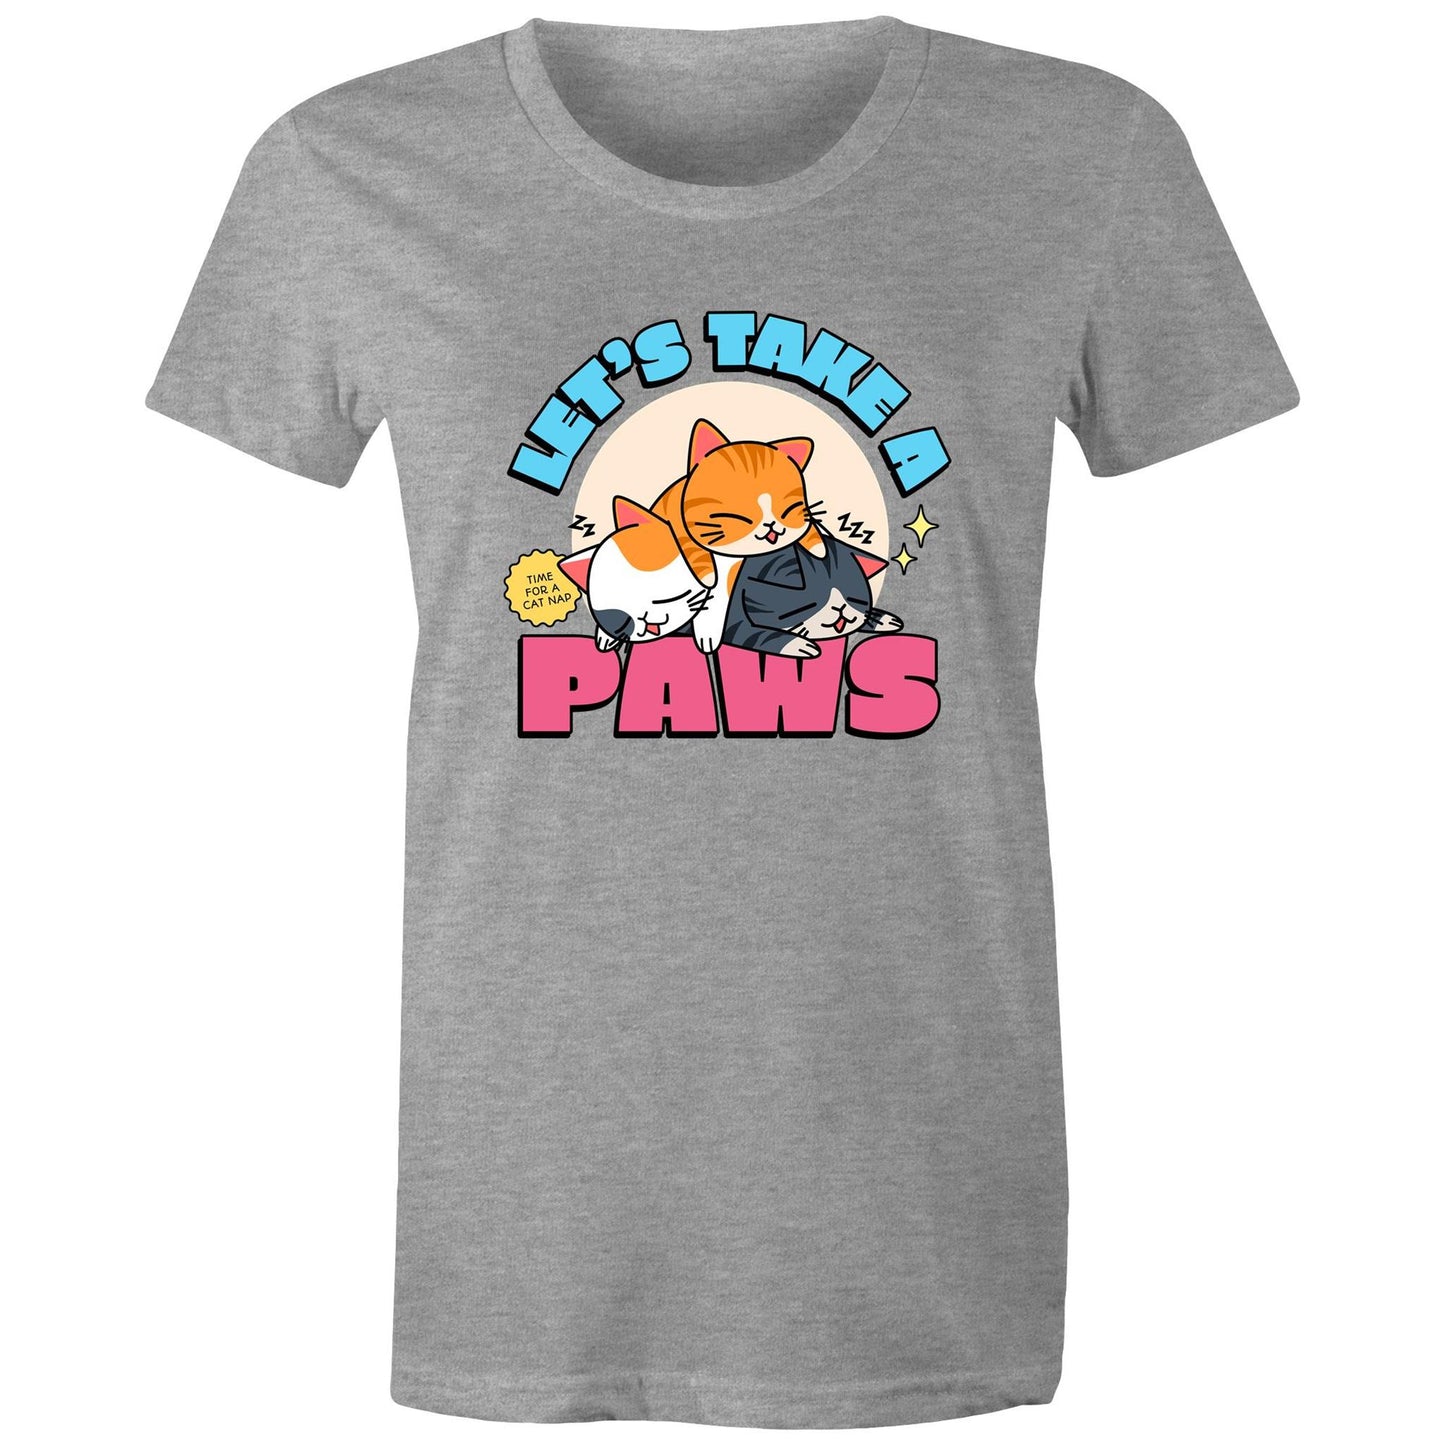 Let's Take A Paws, Time For A Cat Nap - Womens T-shirt Grey Marle Womens T-shirt animal